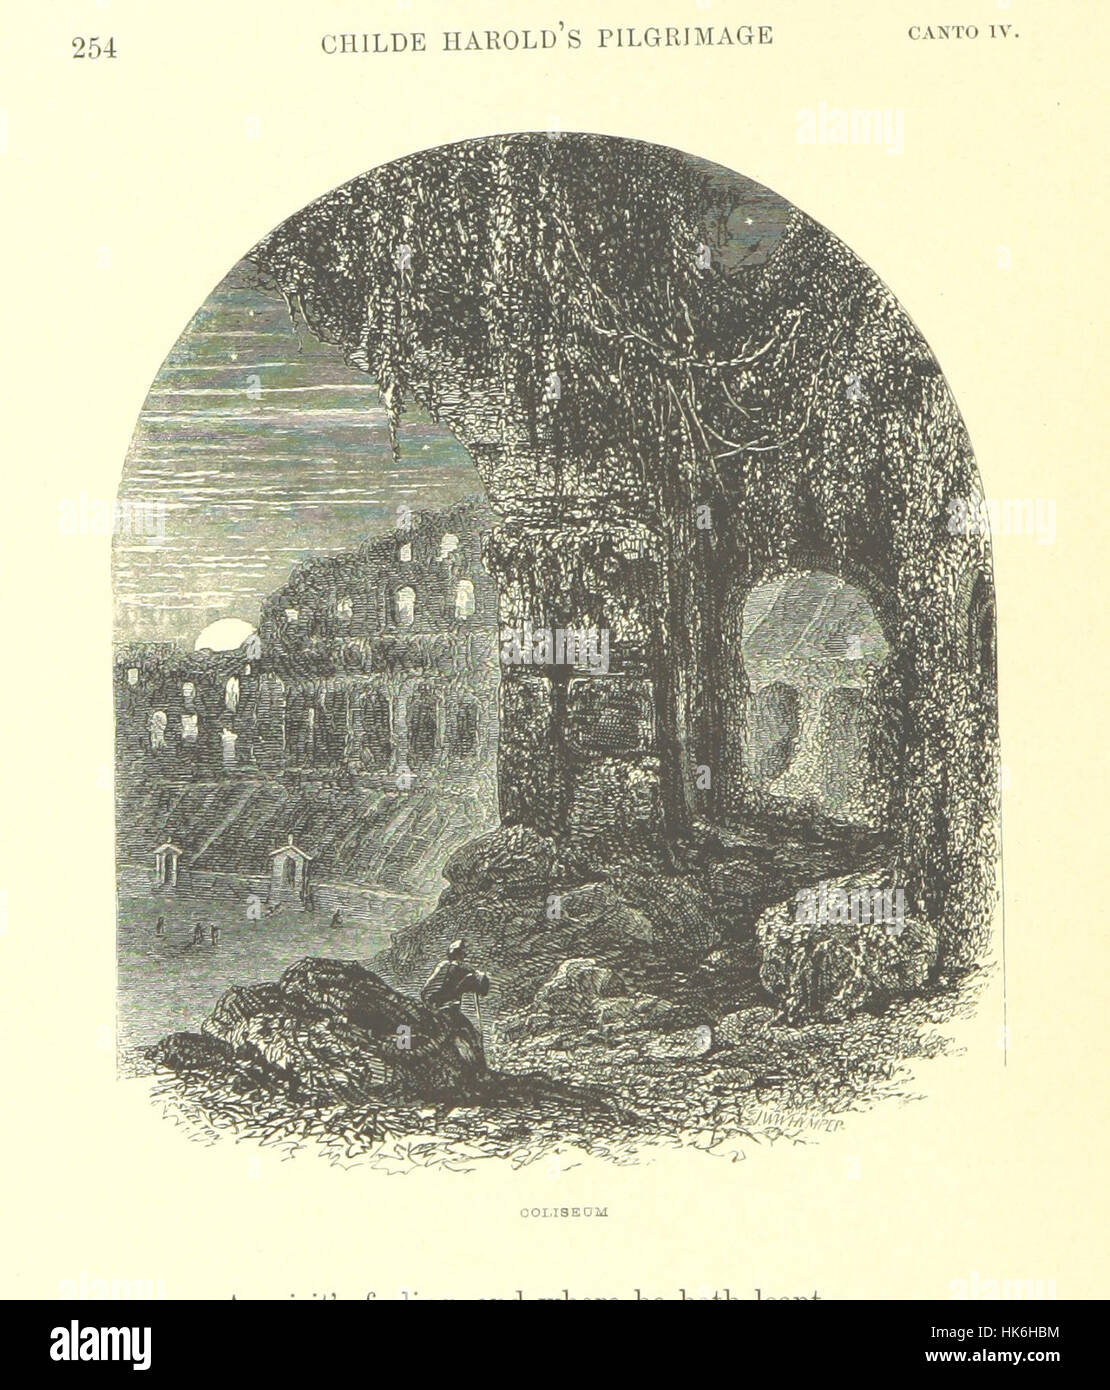 Image taken from page 278 of '[Childe Harold's Pilgrimage. A romaunt. [With a portrait.]]' Image taken from page 278 of '[Childe Harold's Stock Photo